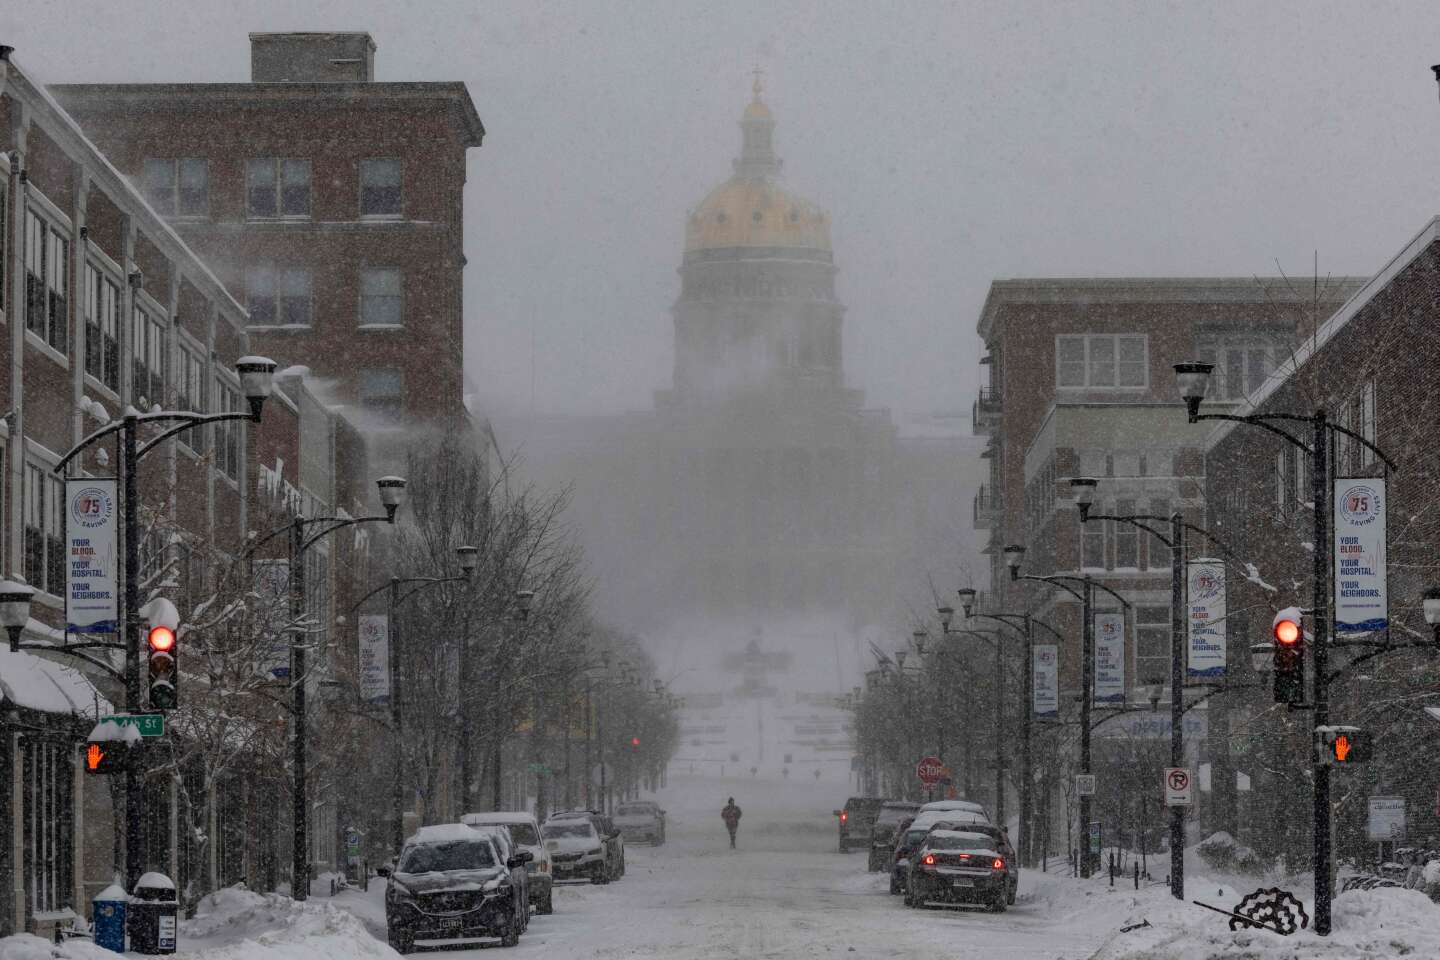 A snowstorm hit Iowa three days before Donald Trump's crucial primary